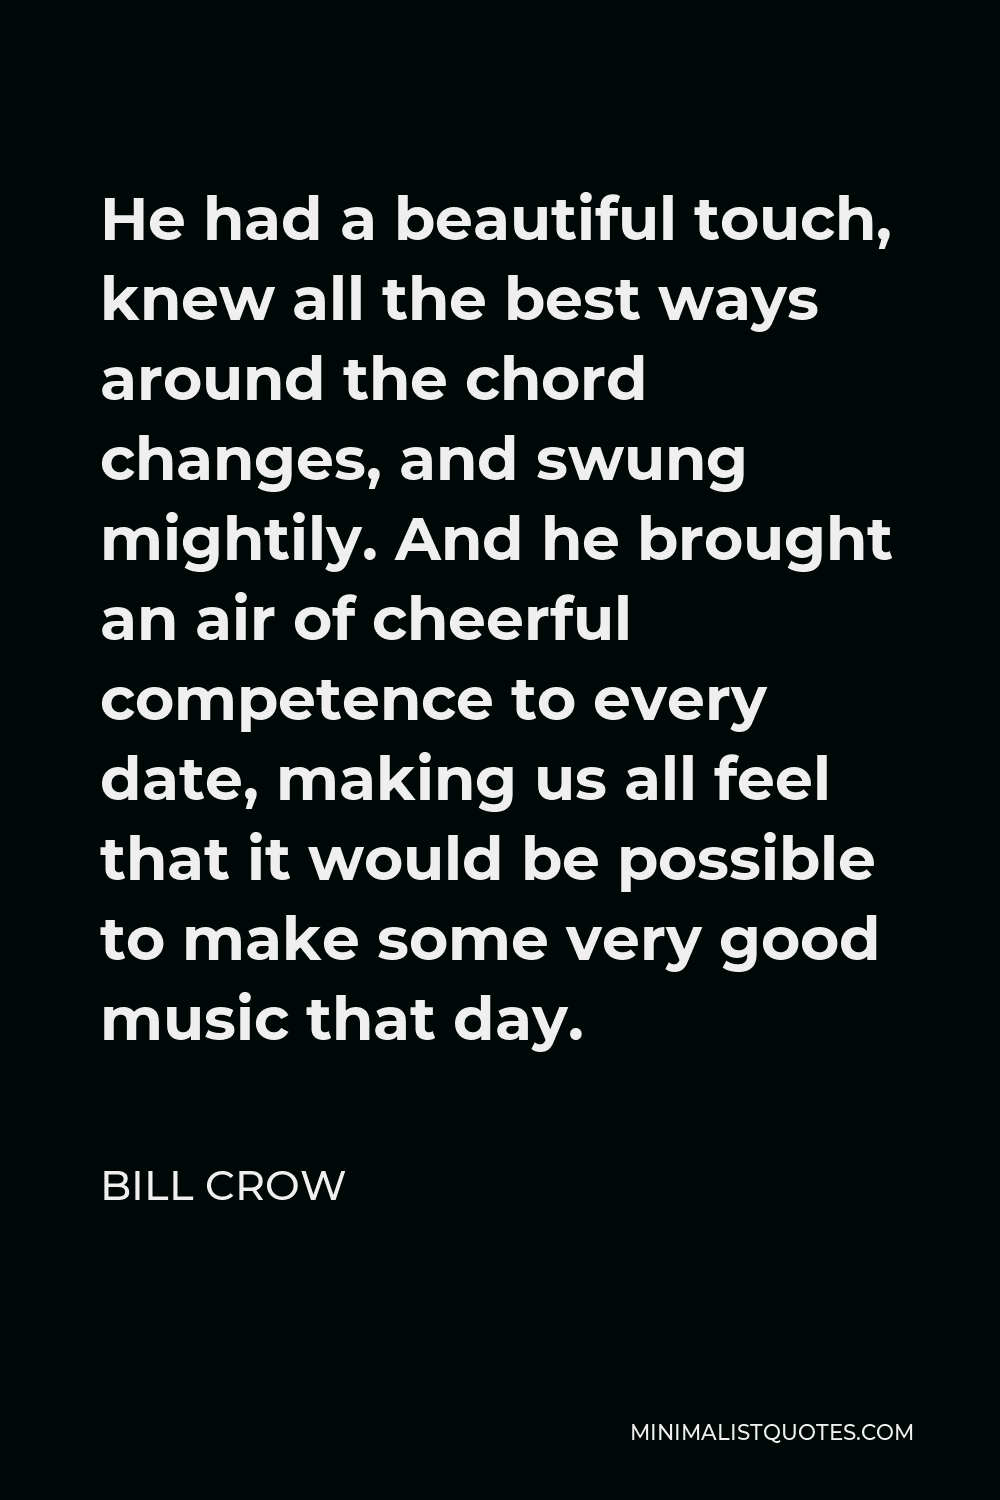 Bill Crow Quote - He had a beautiful touch, knew all the best ways around the chord changes, and swung mightily. And he brought an air of cheerful competence to every date, making us all feel that it would be possible to make some very good music that day.